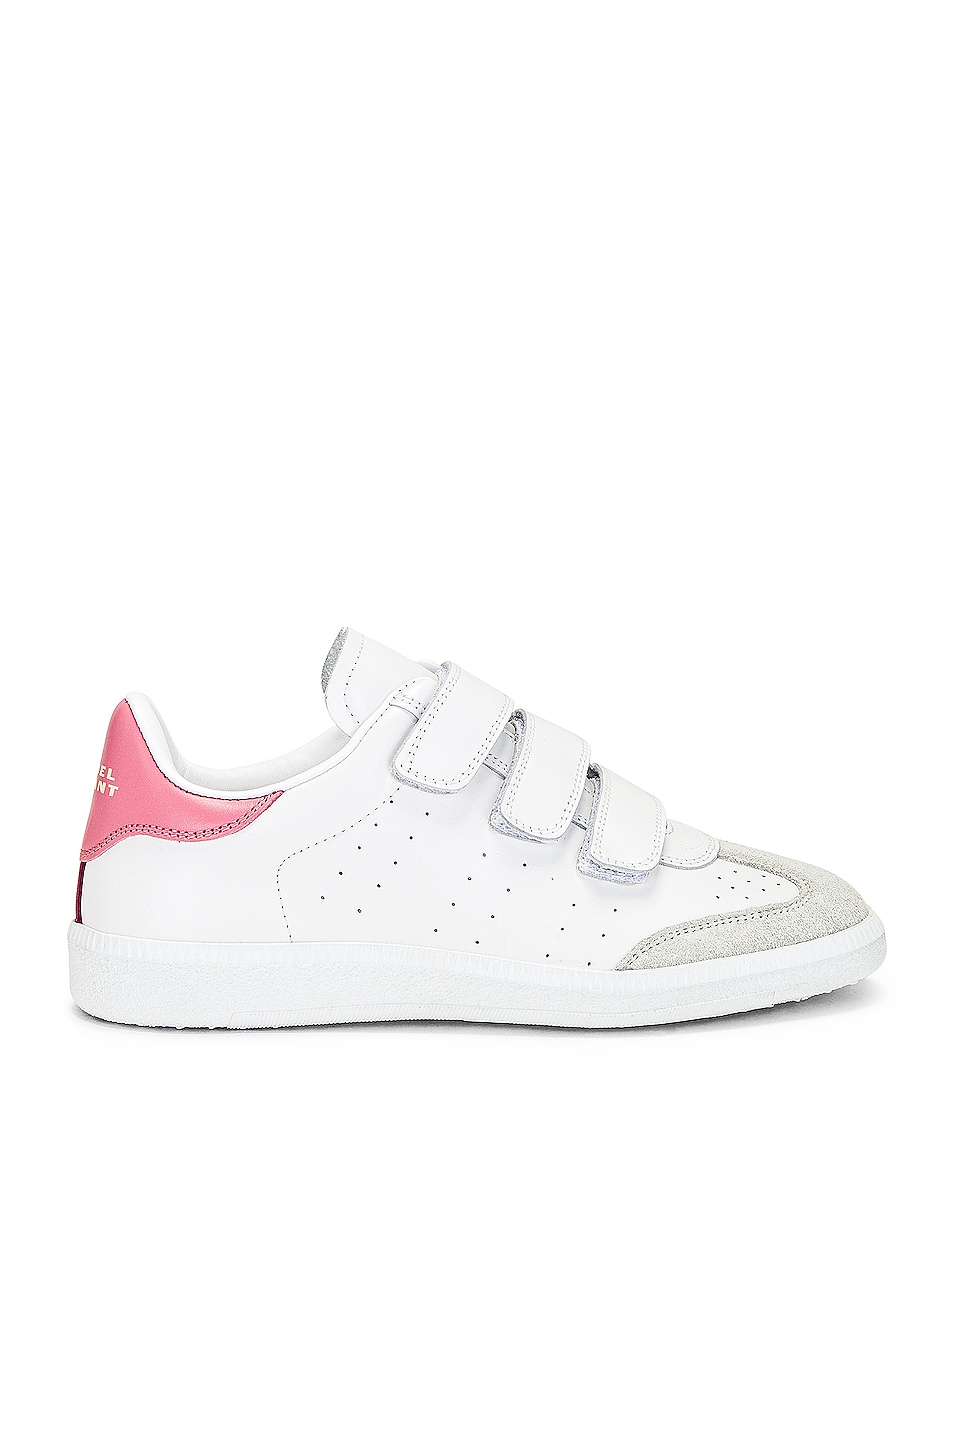 Isabel Marant Beth Sneaker in Candy Pink | FWRD